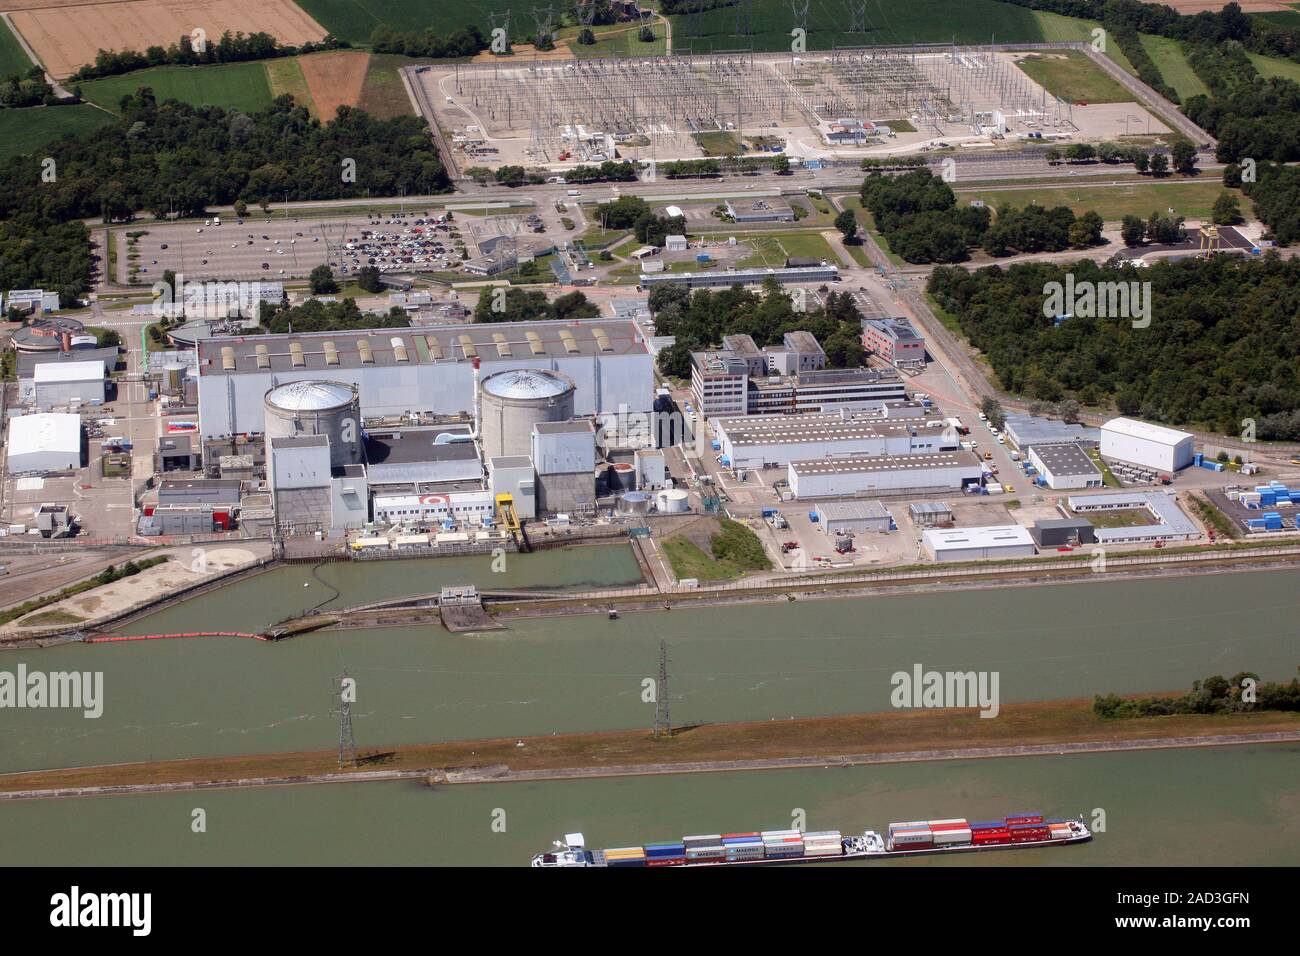 Fessenheim nuclear power plant in Alsace, France Stock Photo